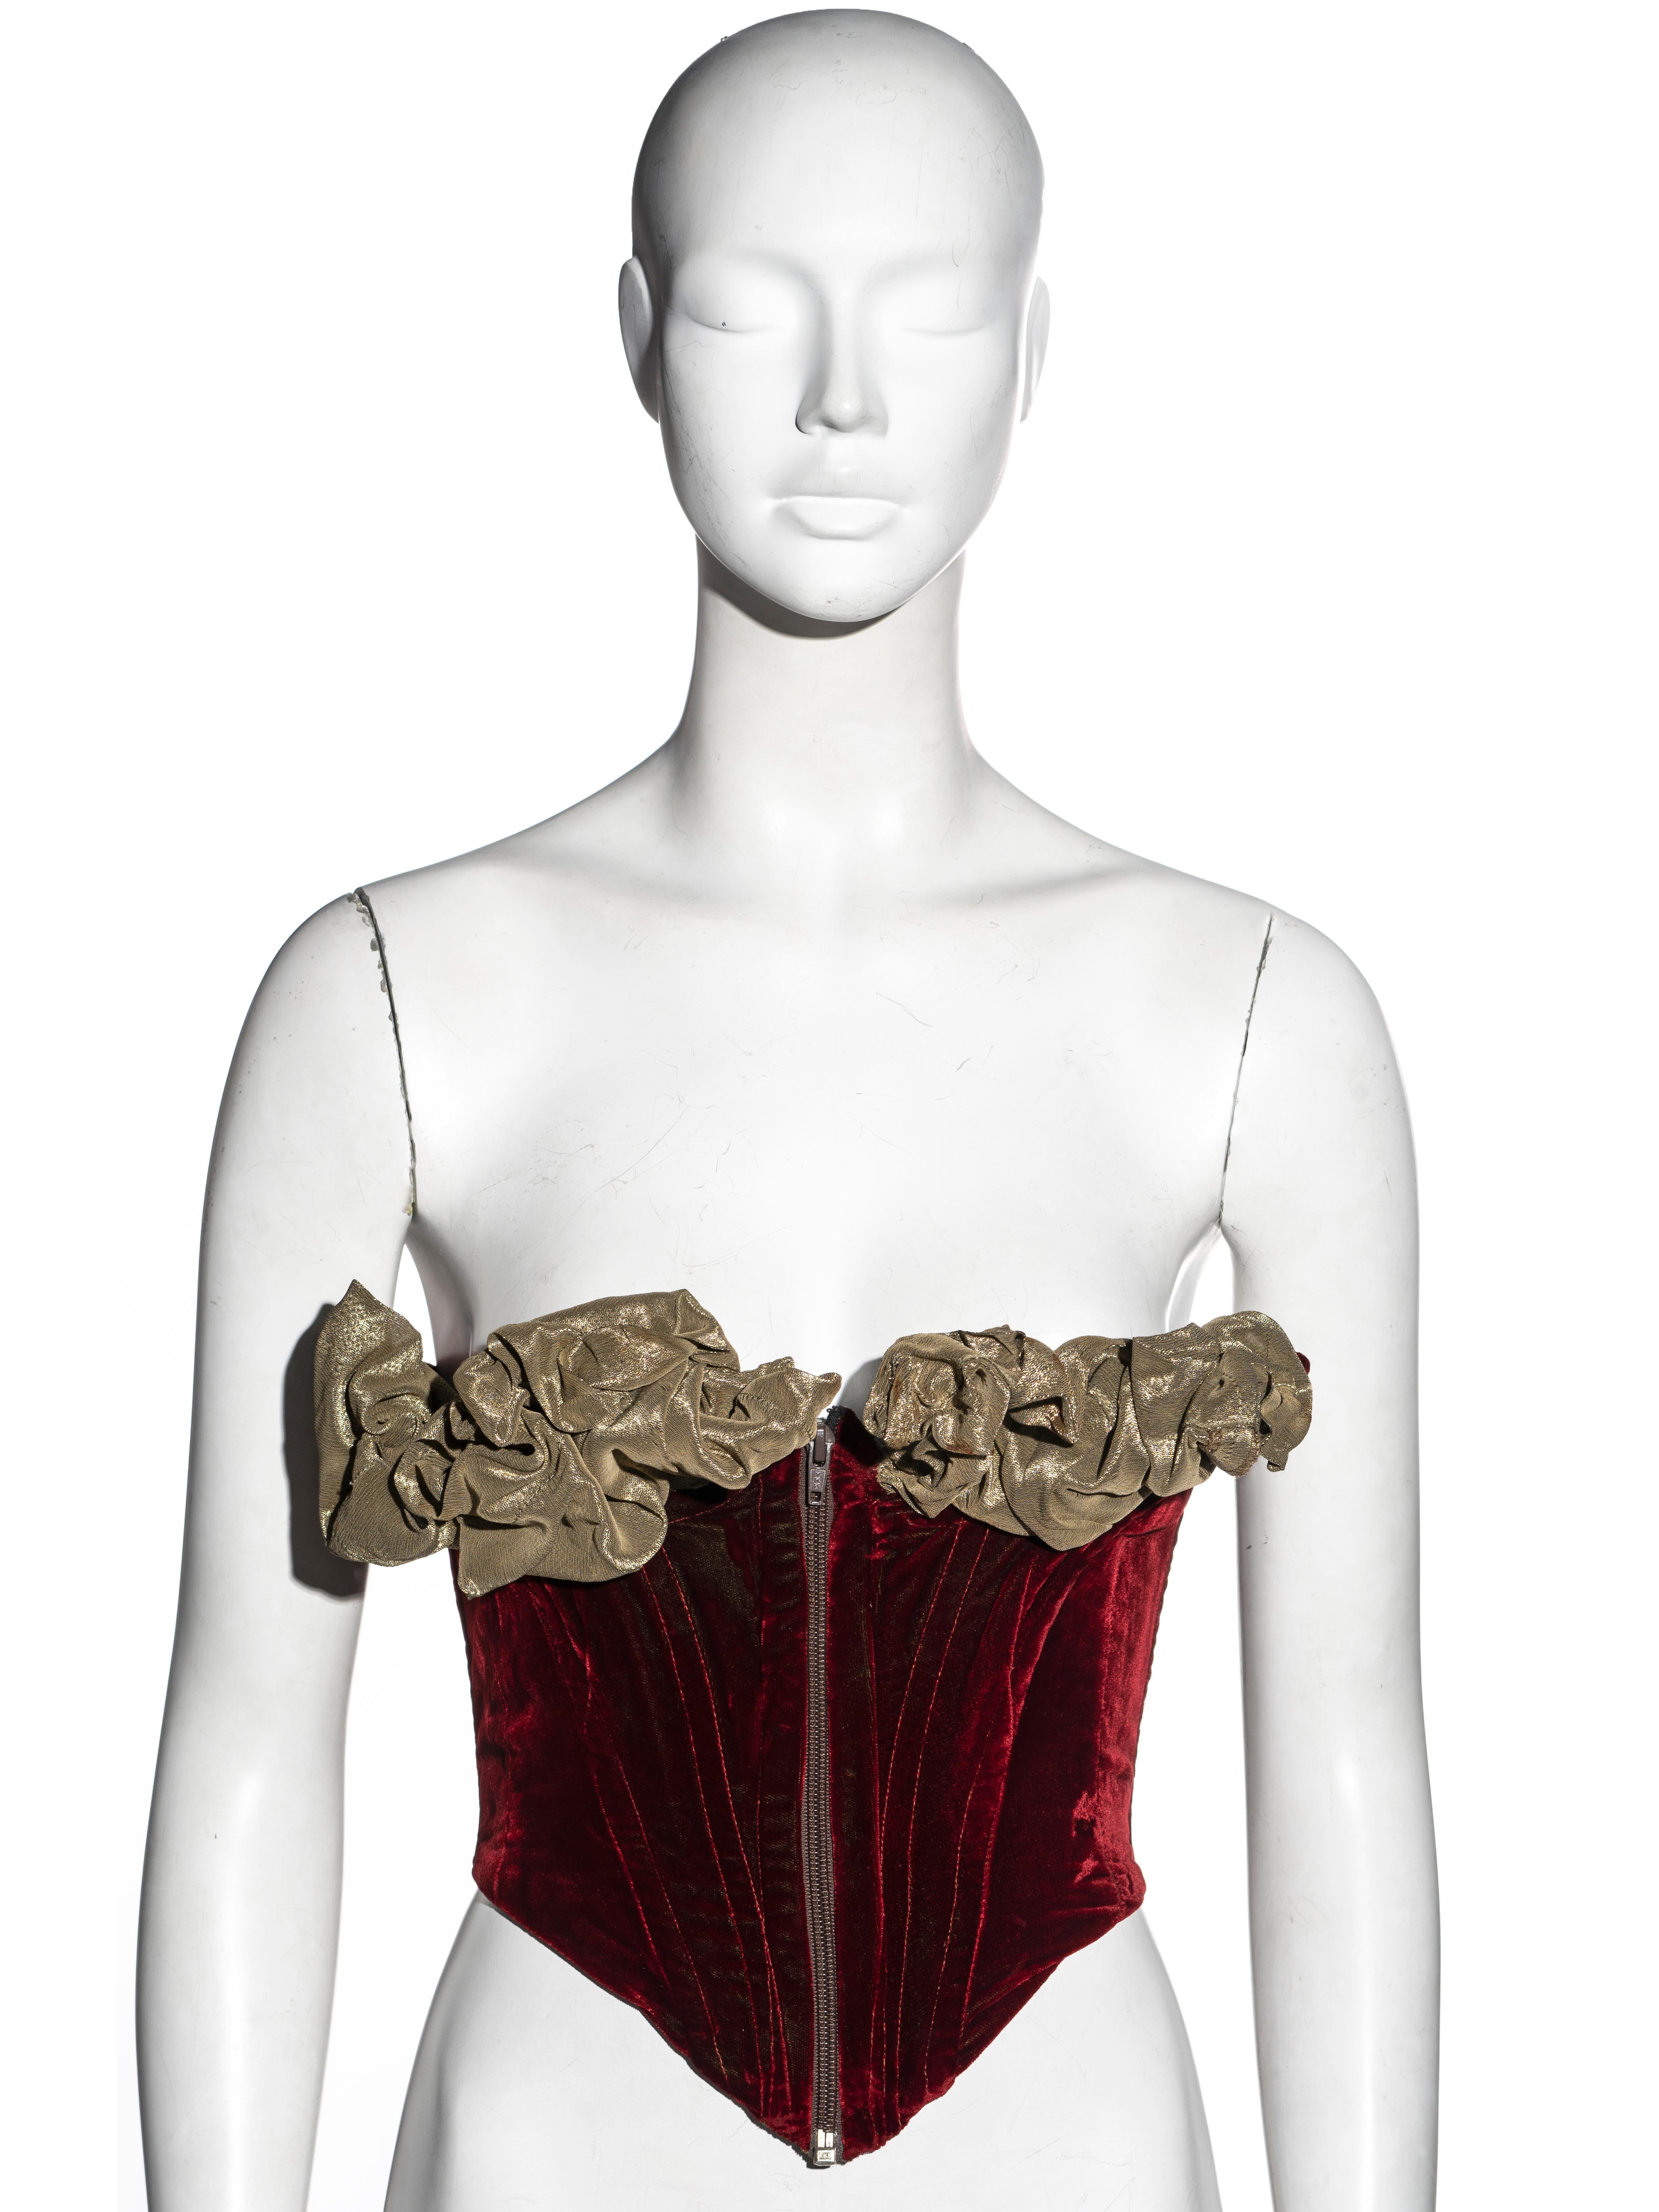 ▪ Vivienne Westwood strapless corset
▪ Museum piece
▪ Red velvet 
▪ Olive lamé bra with wired piping 
▪ Center-front zipper
▪ Size XS/S
▪ Fall-Winter 1989
▪ Made in England